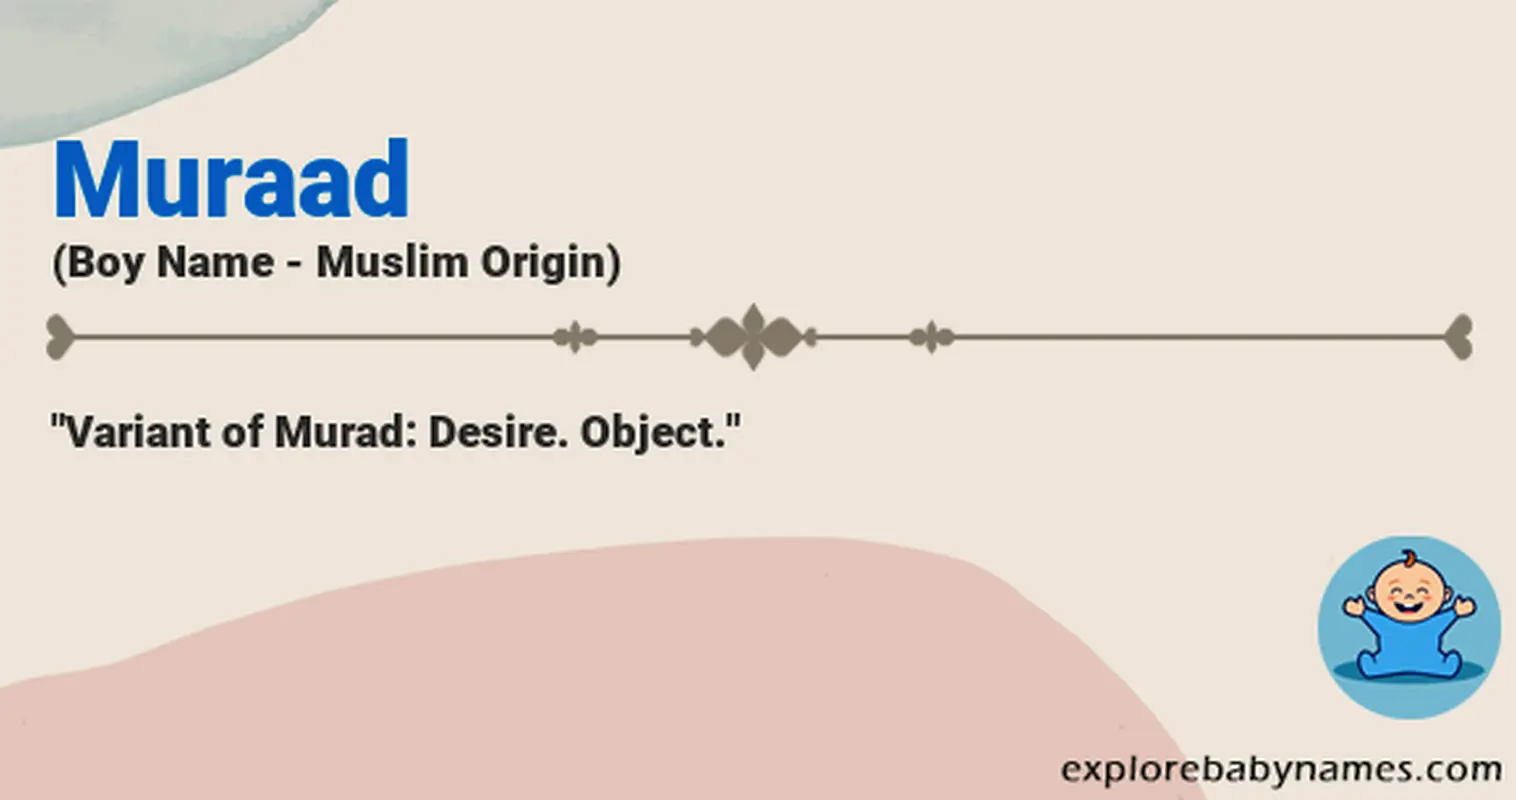 Meaning of Muraad